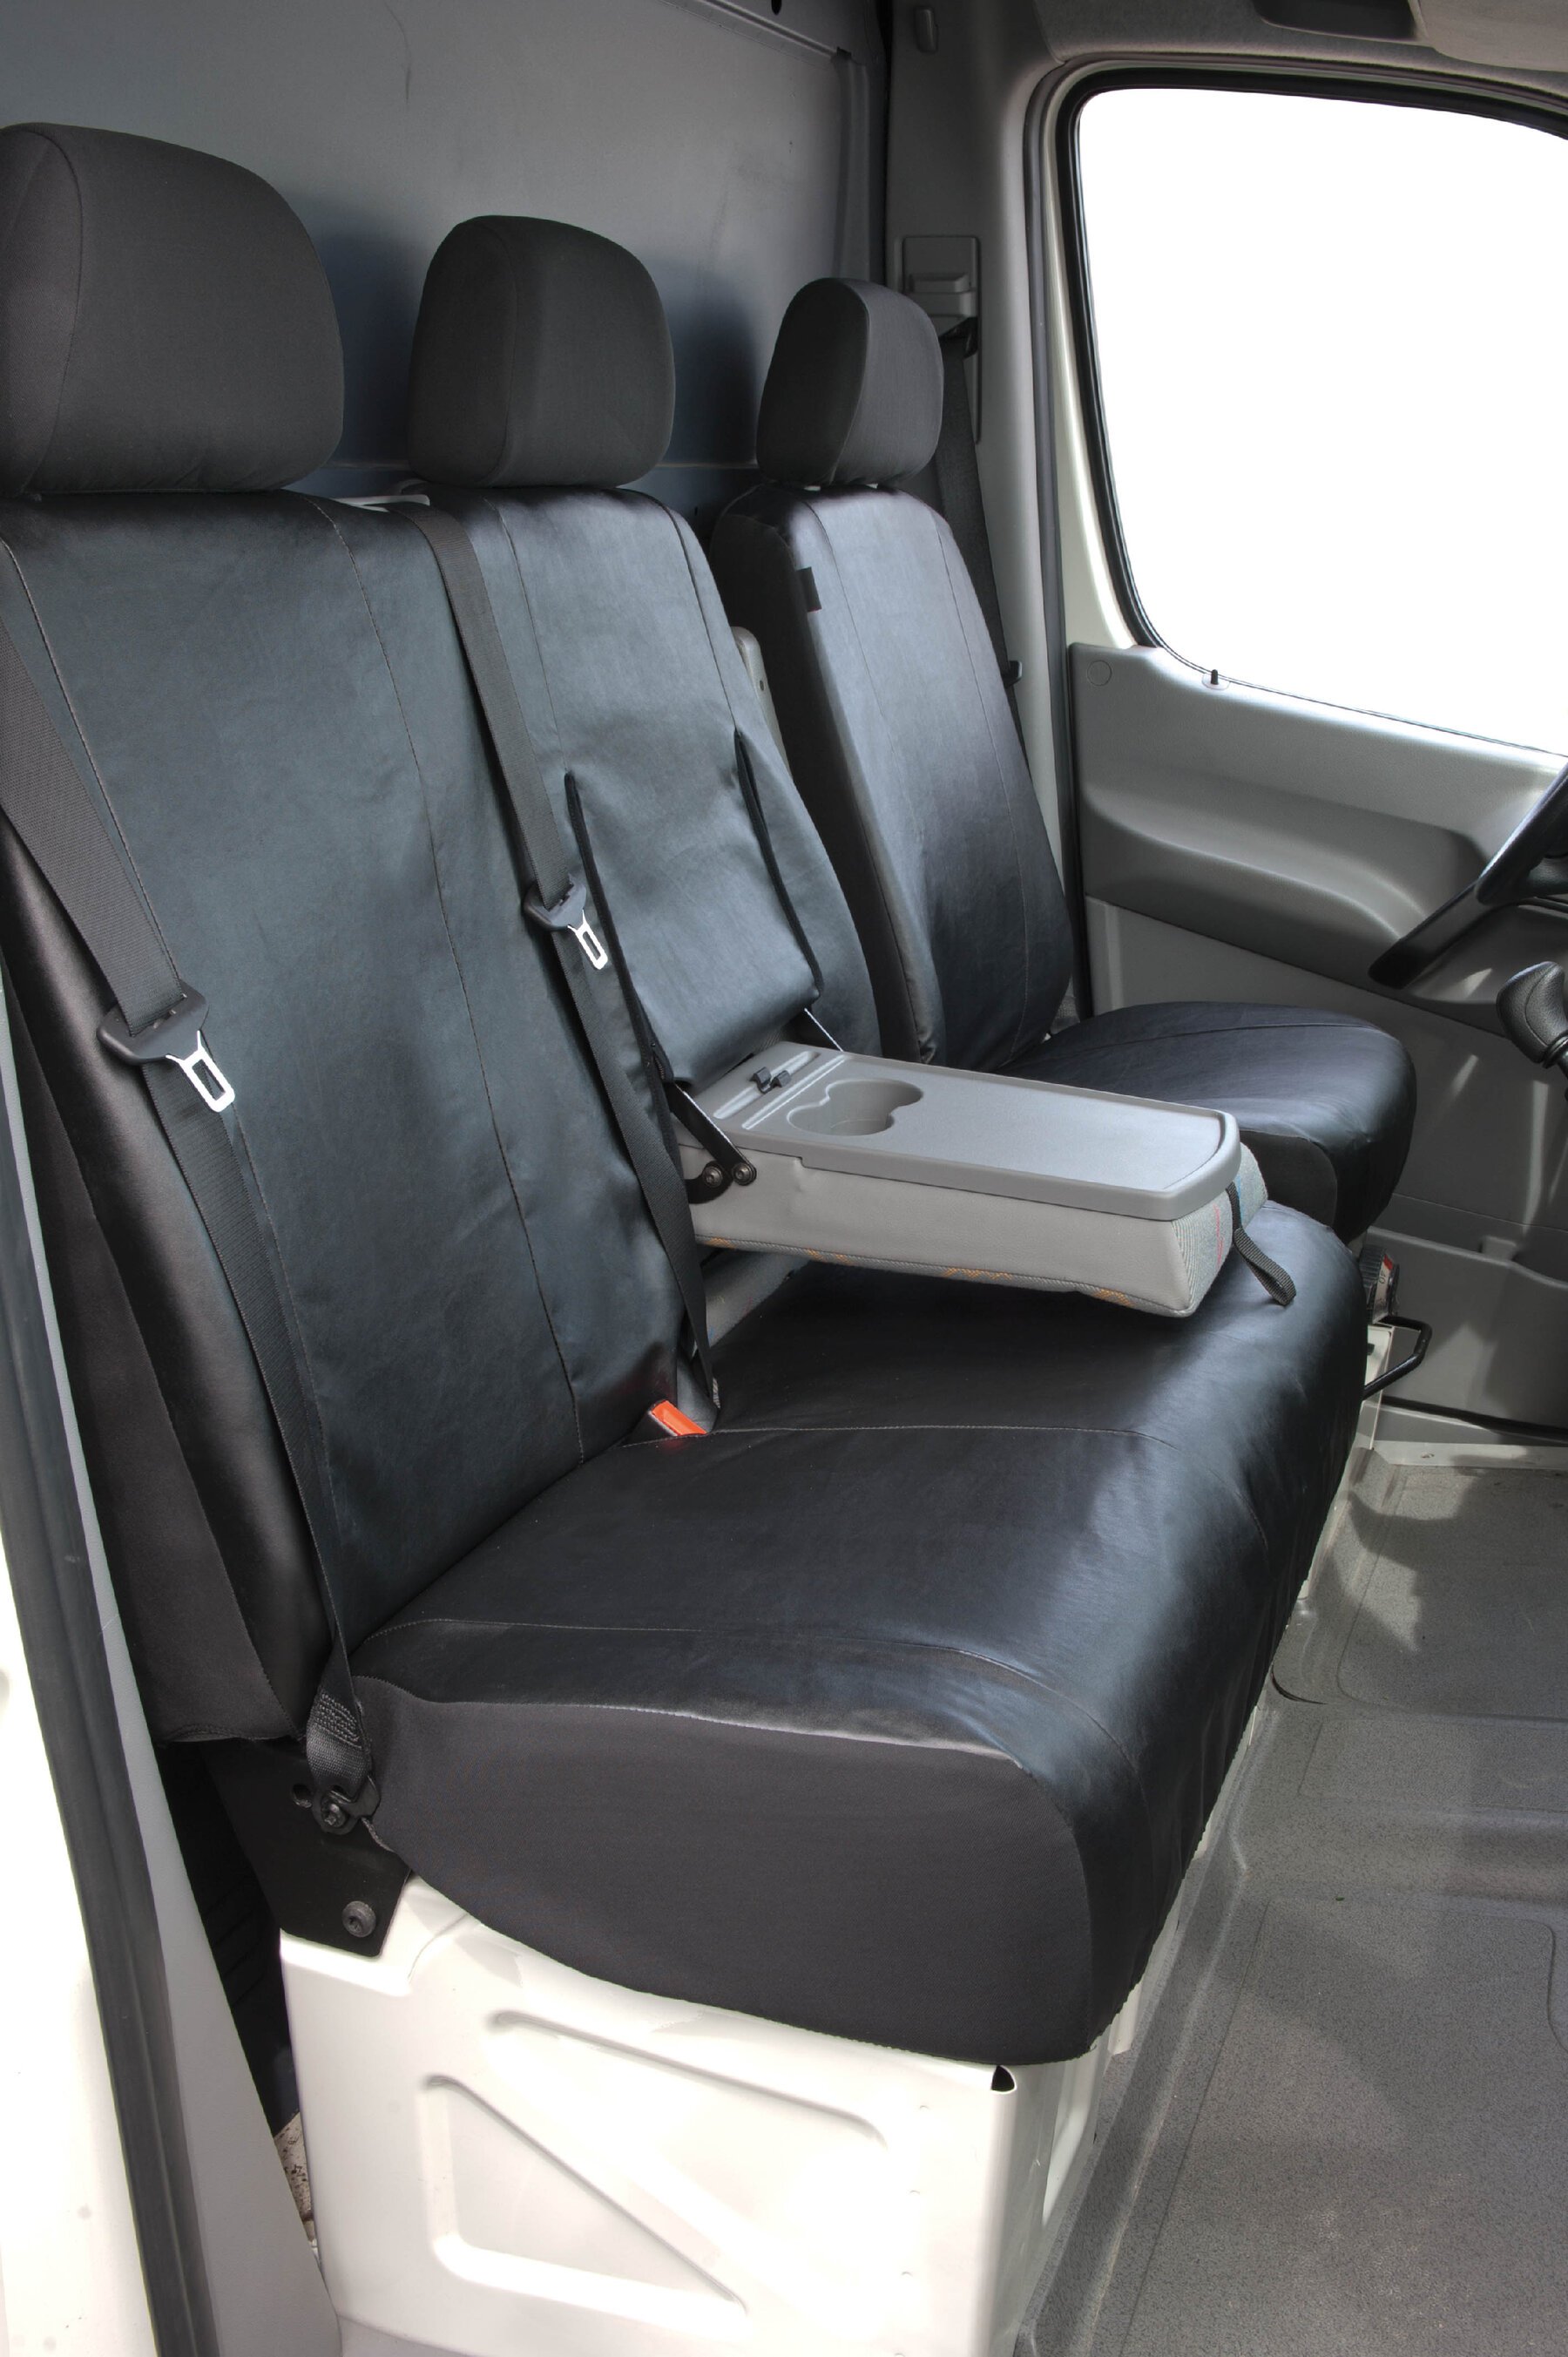 Car Seat cover Transporter made of imitation leather for VW Crafter, Mercedes Sprinter, single & double seat